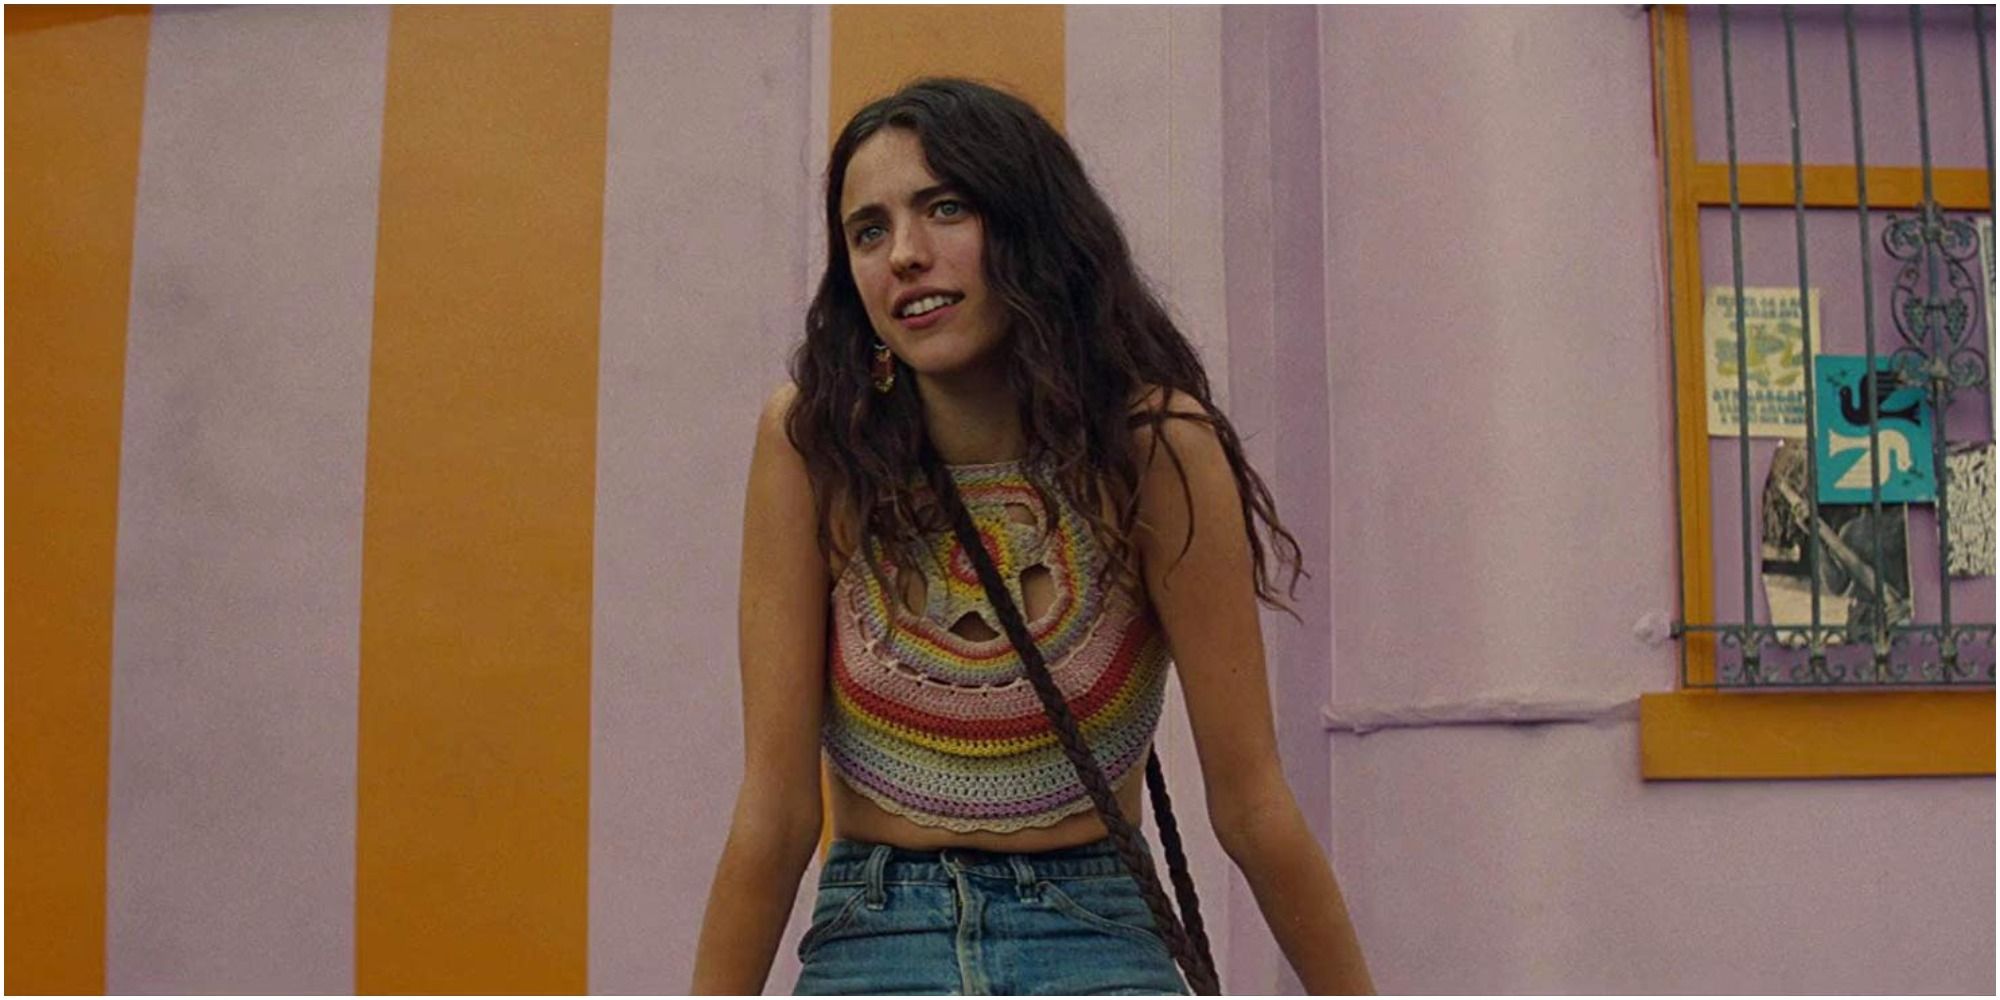 Margaret Qualley as Debra Jo AKA Pussycat in Once Upon a Time in Hollywood